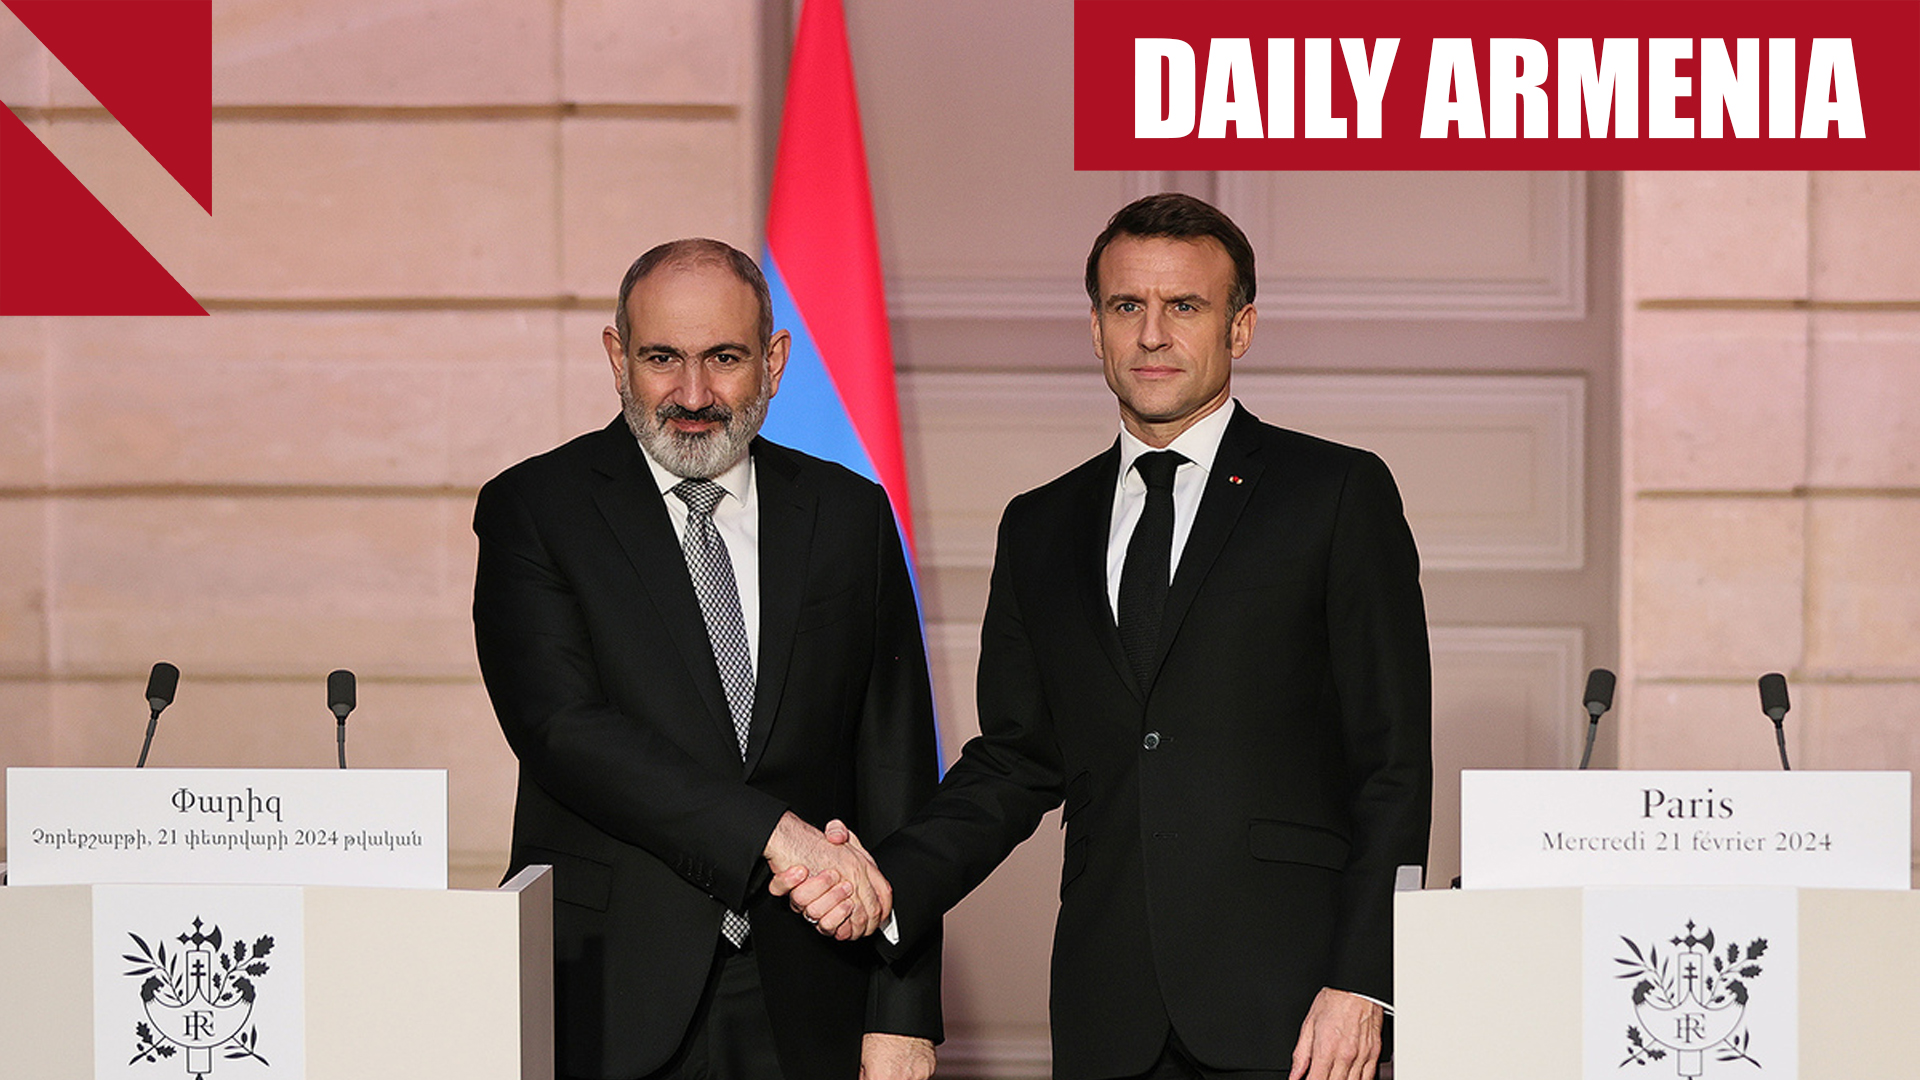 France reaffirms support for Armenia as security partnership deepens